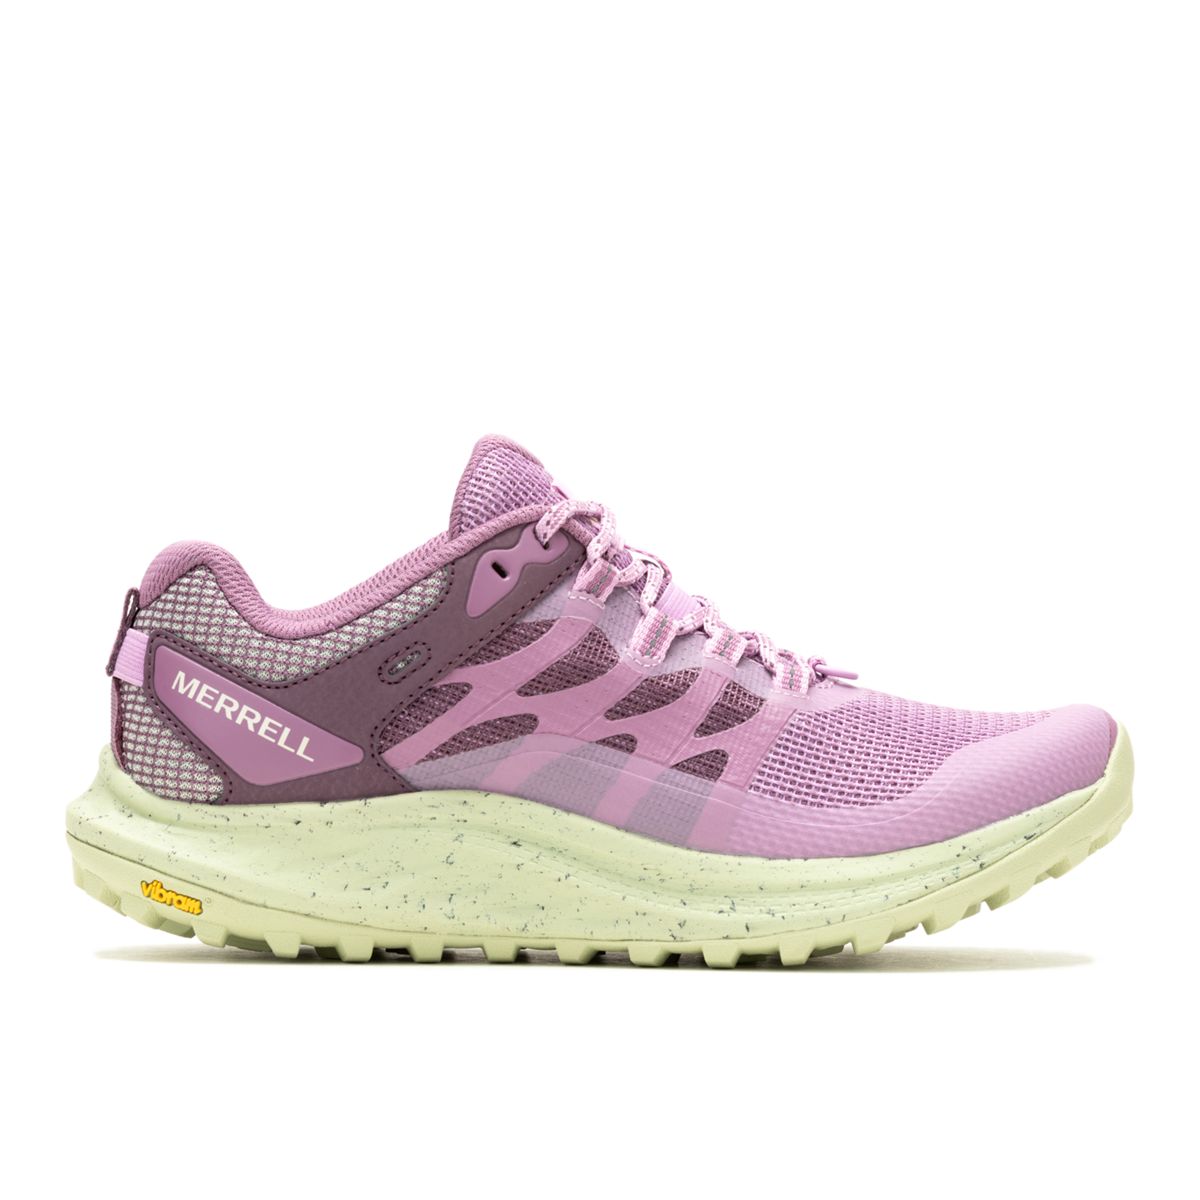 Womens Trail Running Shoes.